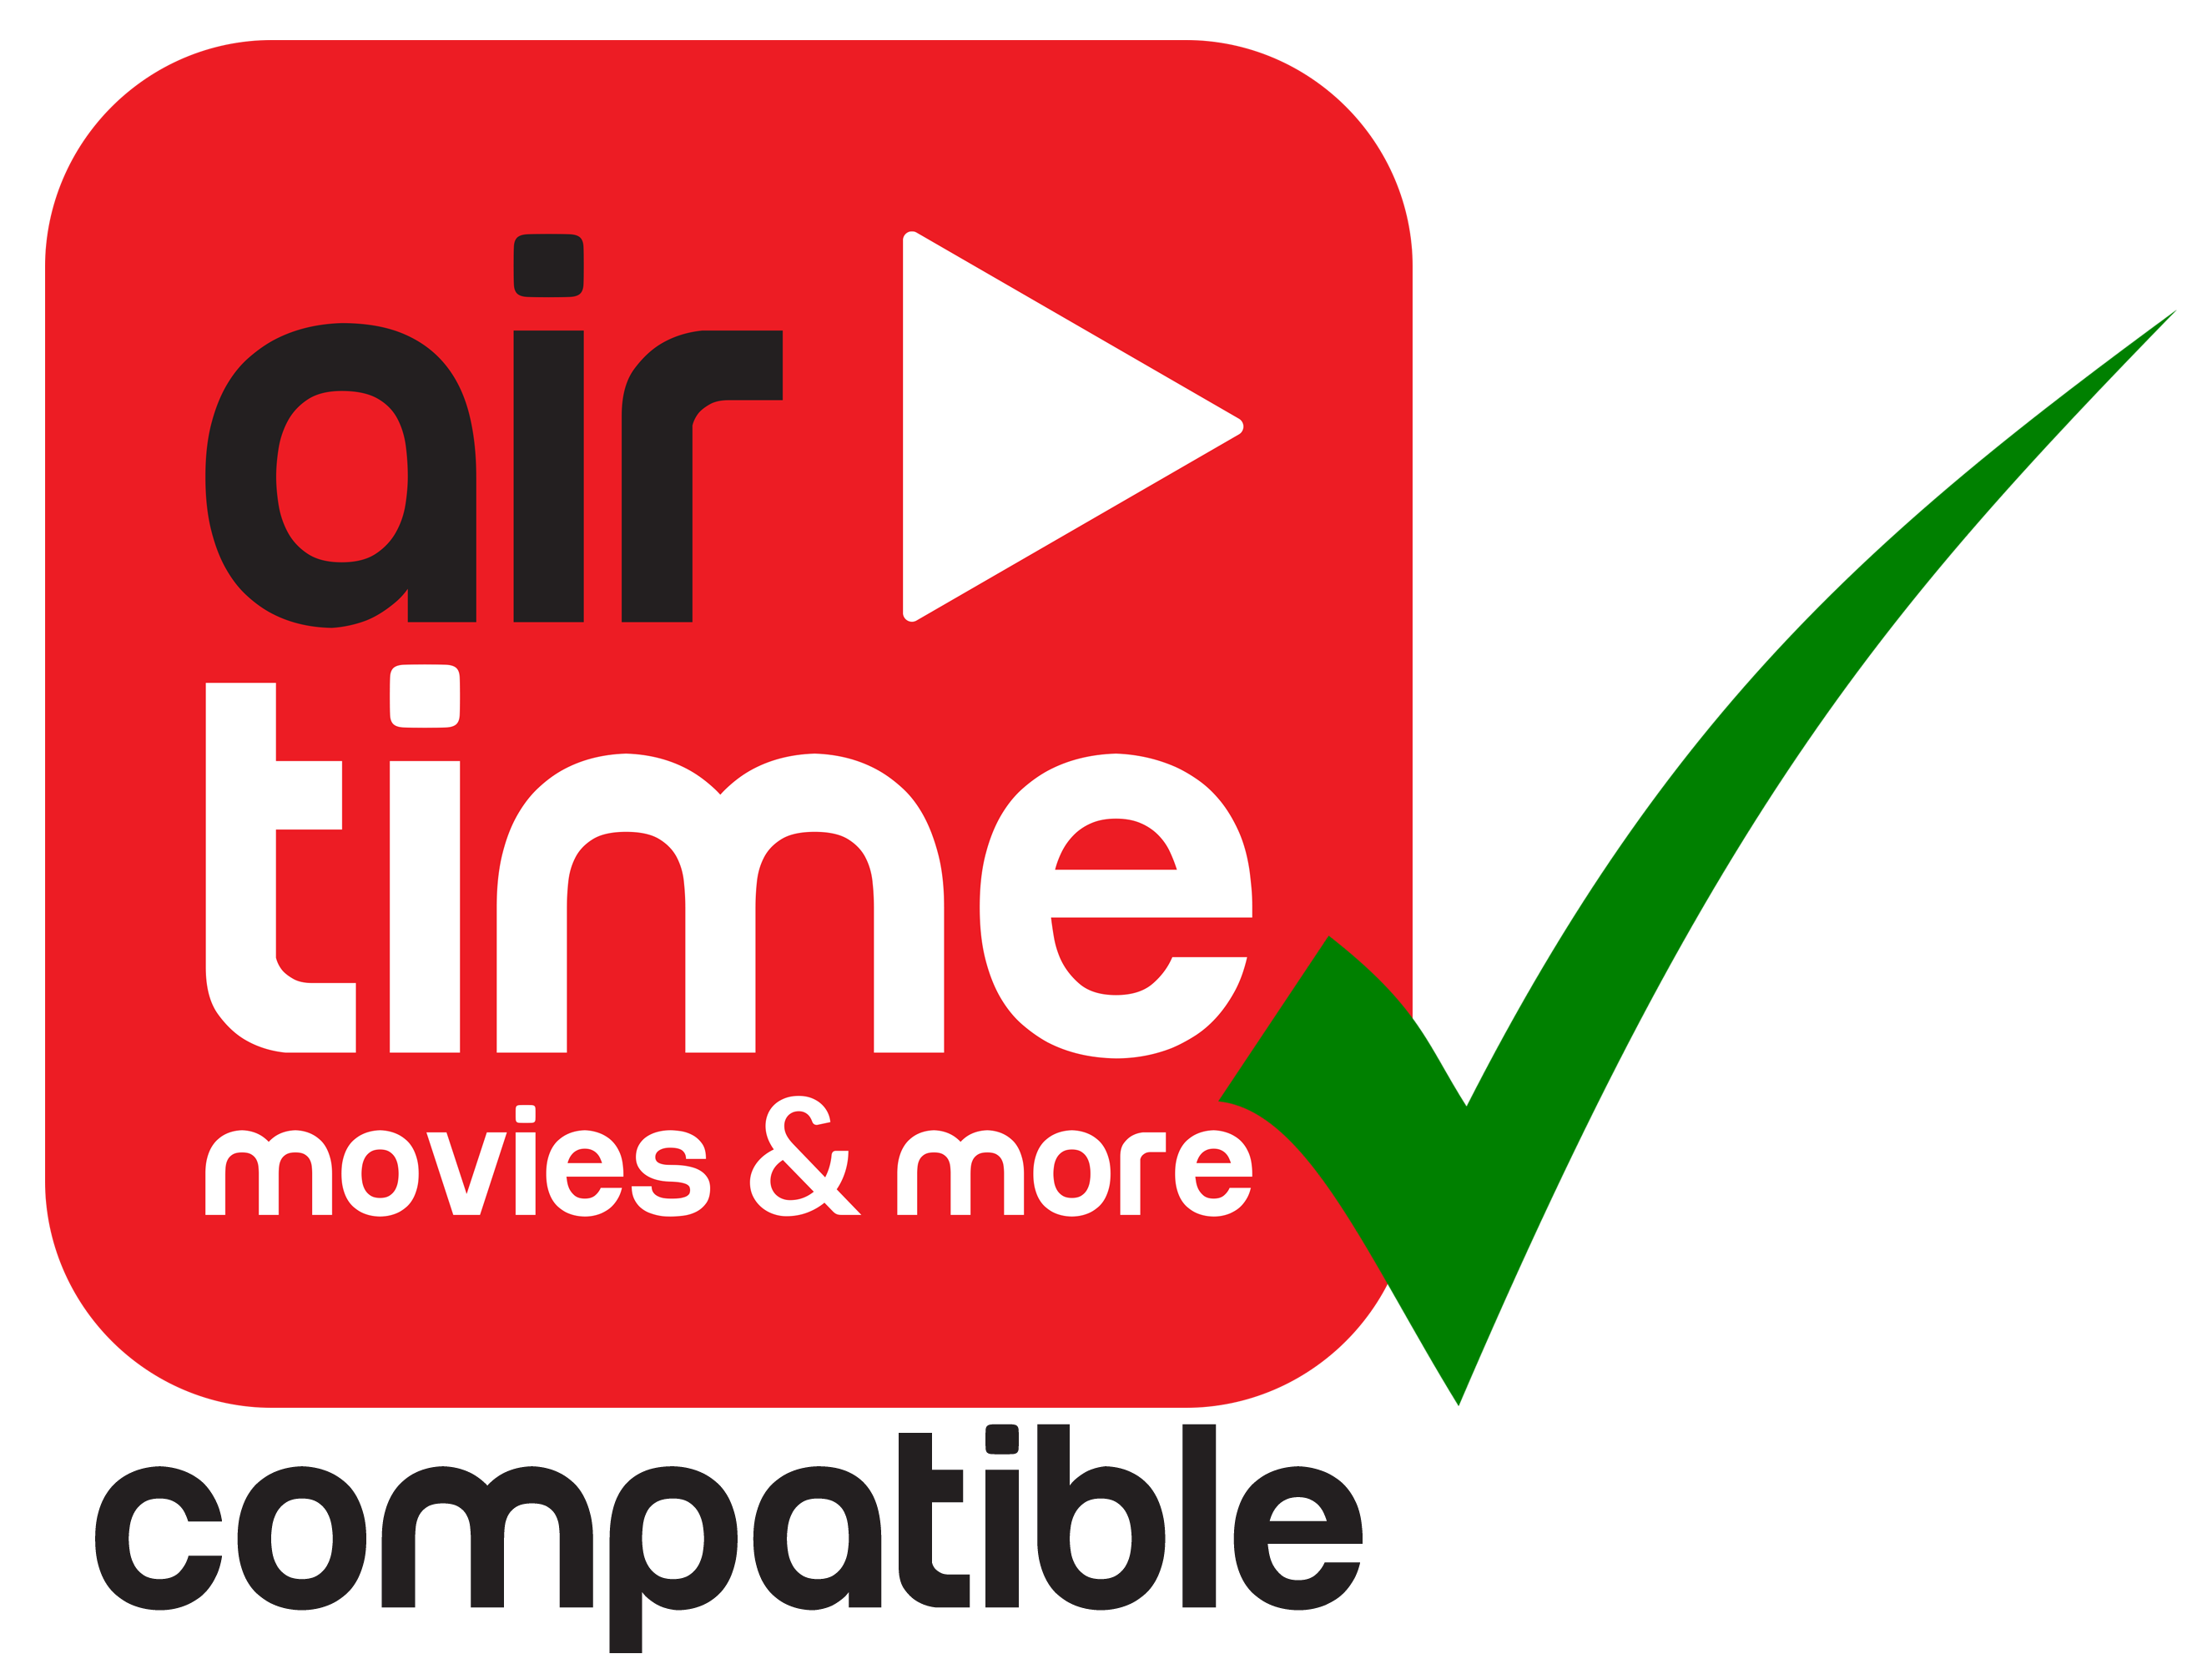 Image of the Airtime App compatible logo